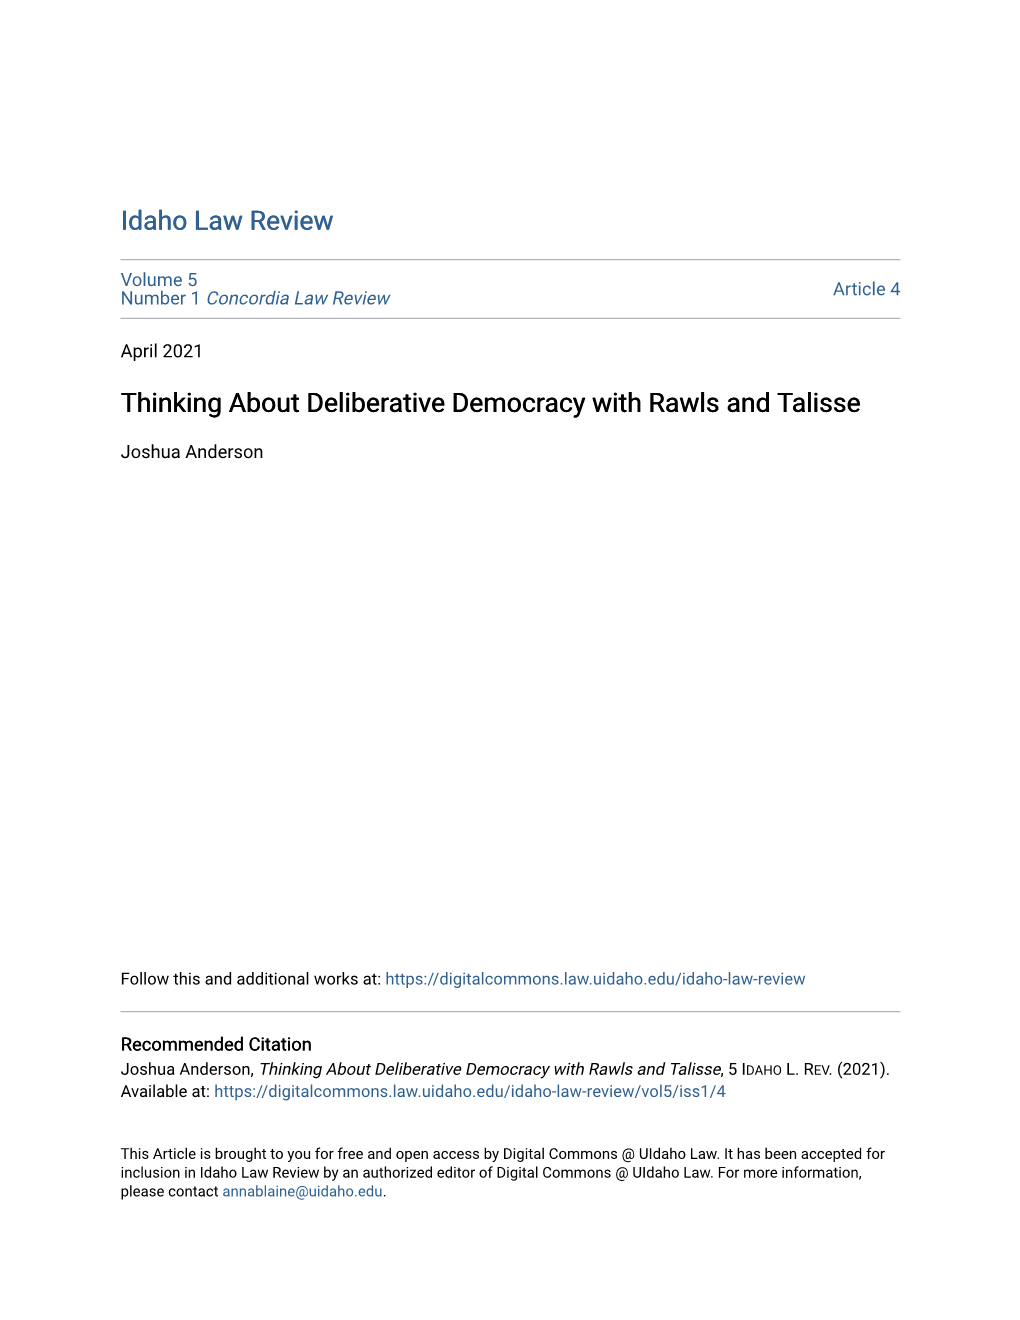 Thinking About Deliberative Democracy with Rawls and Talisse